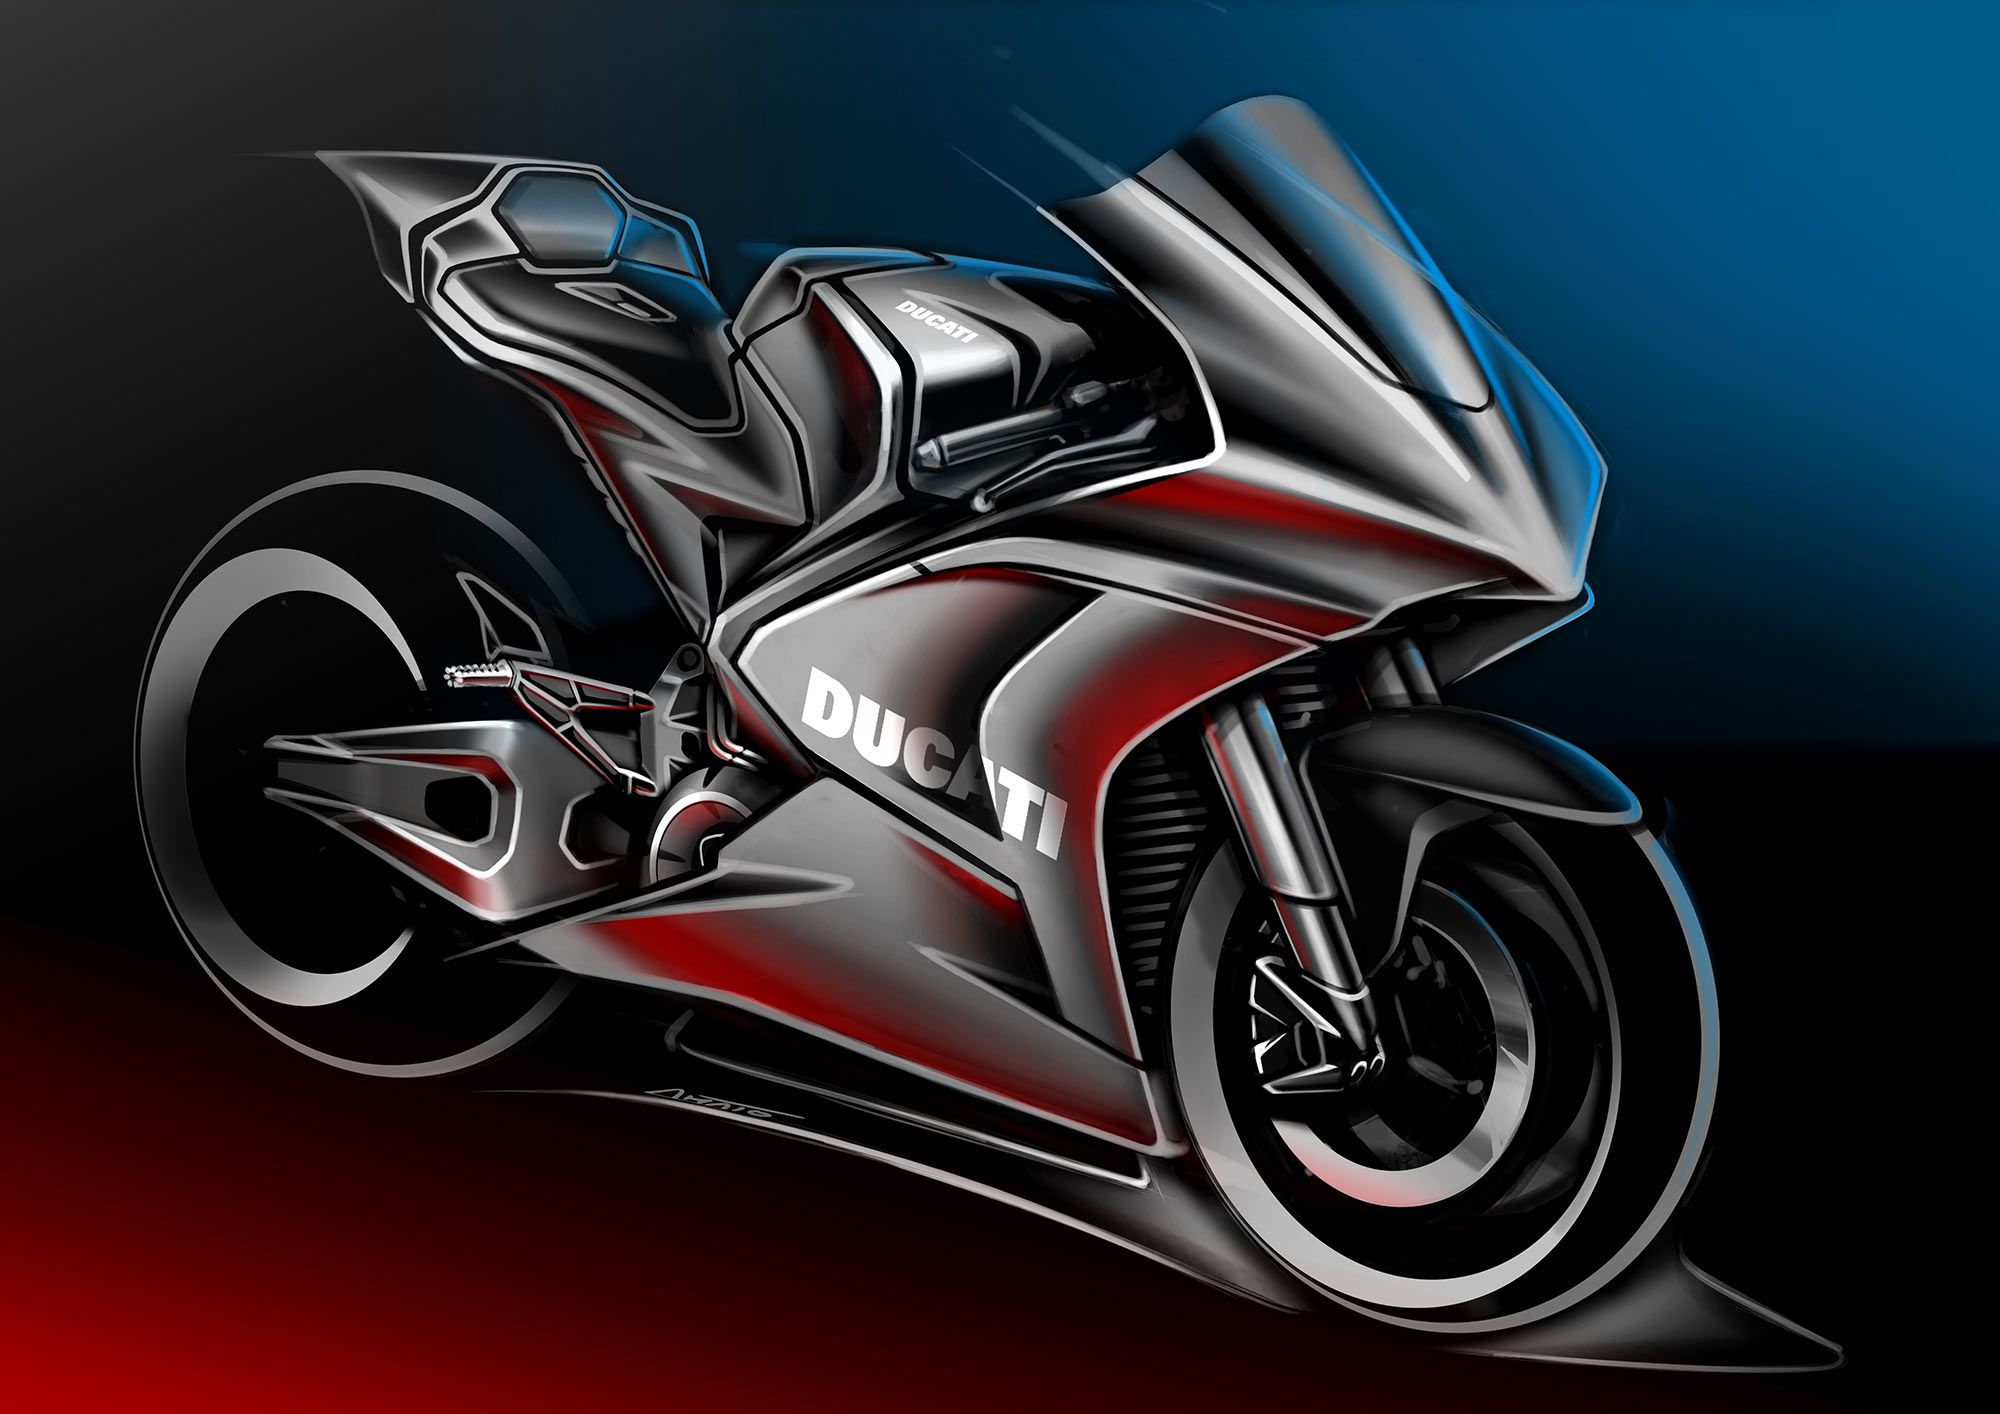 A sketch of what the future Ducati electric motorcycle might look like.